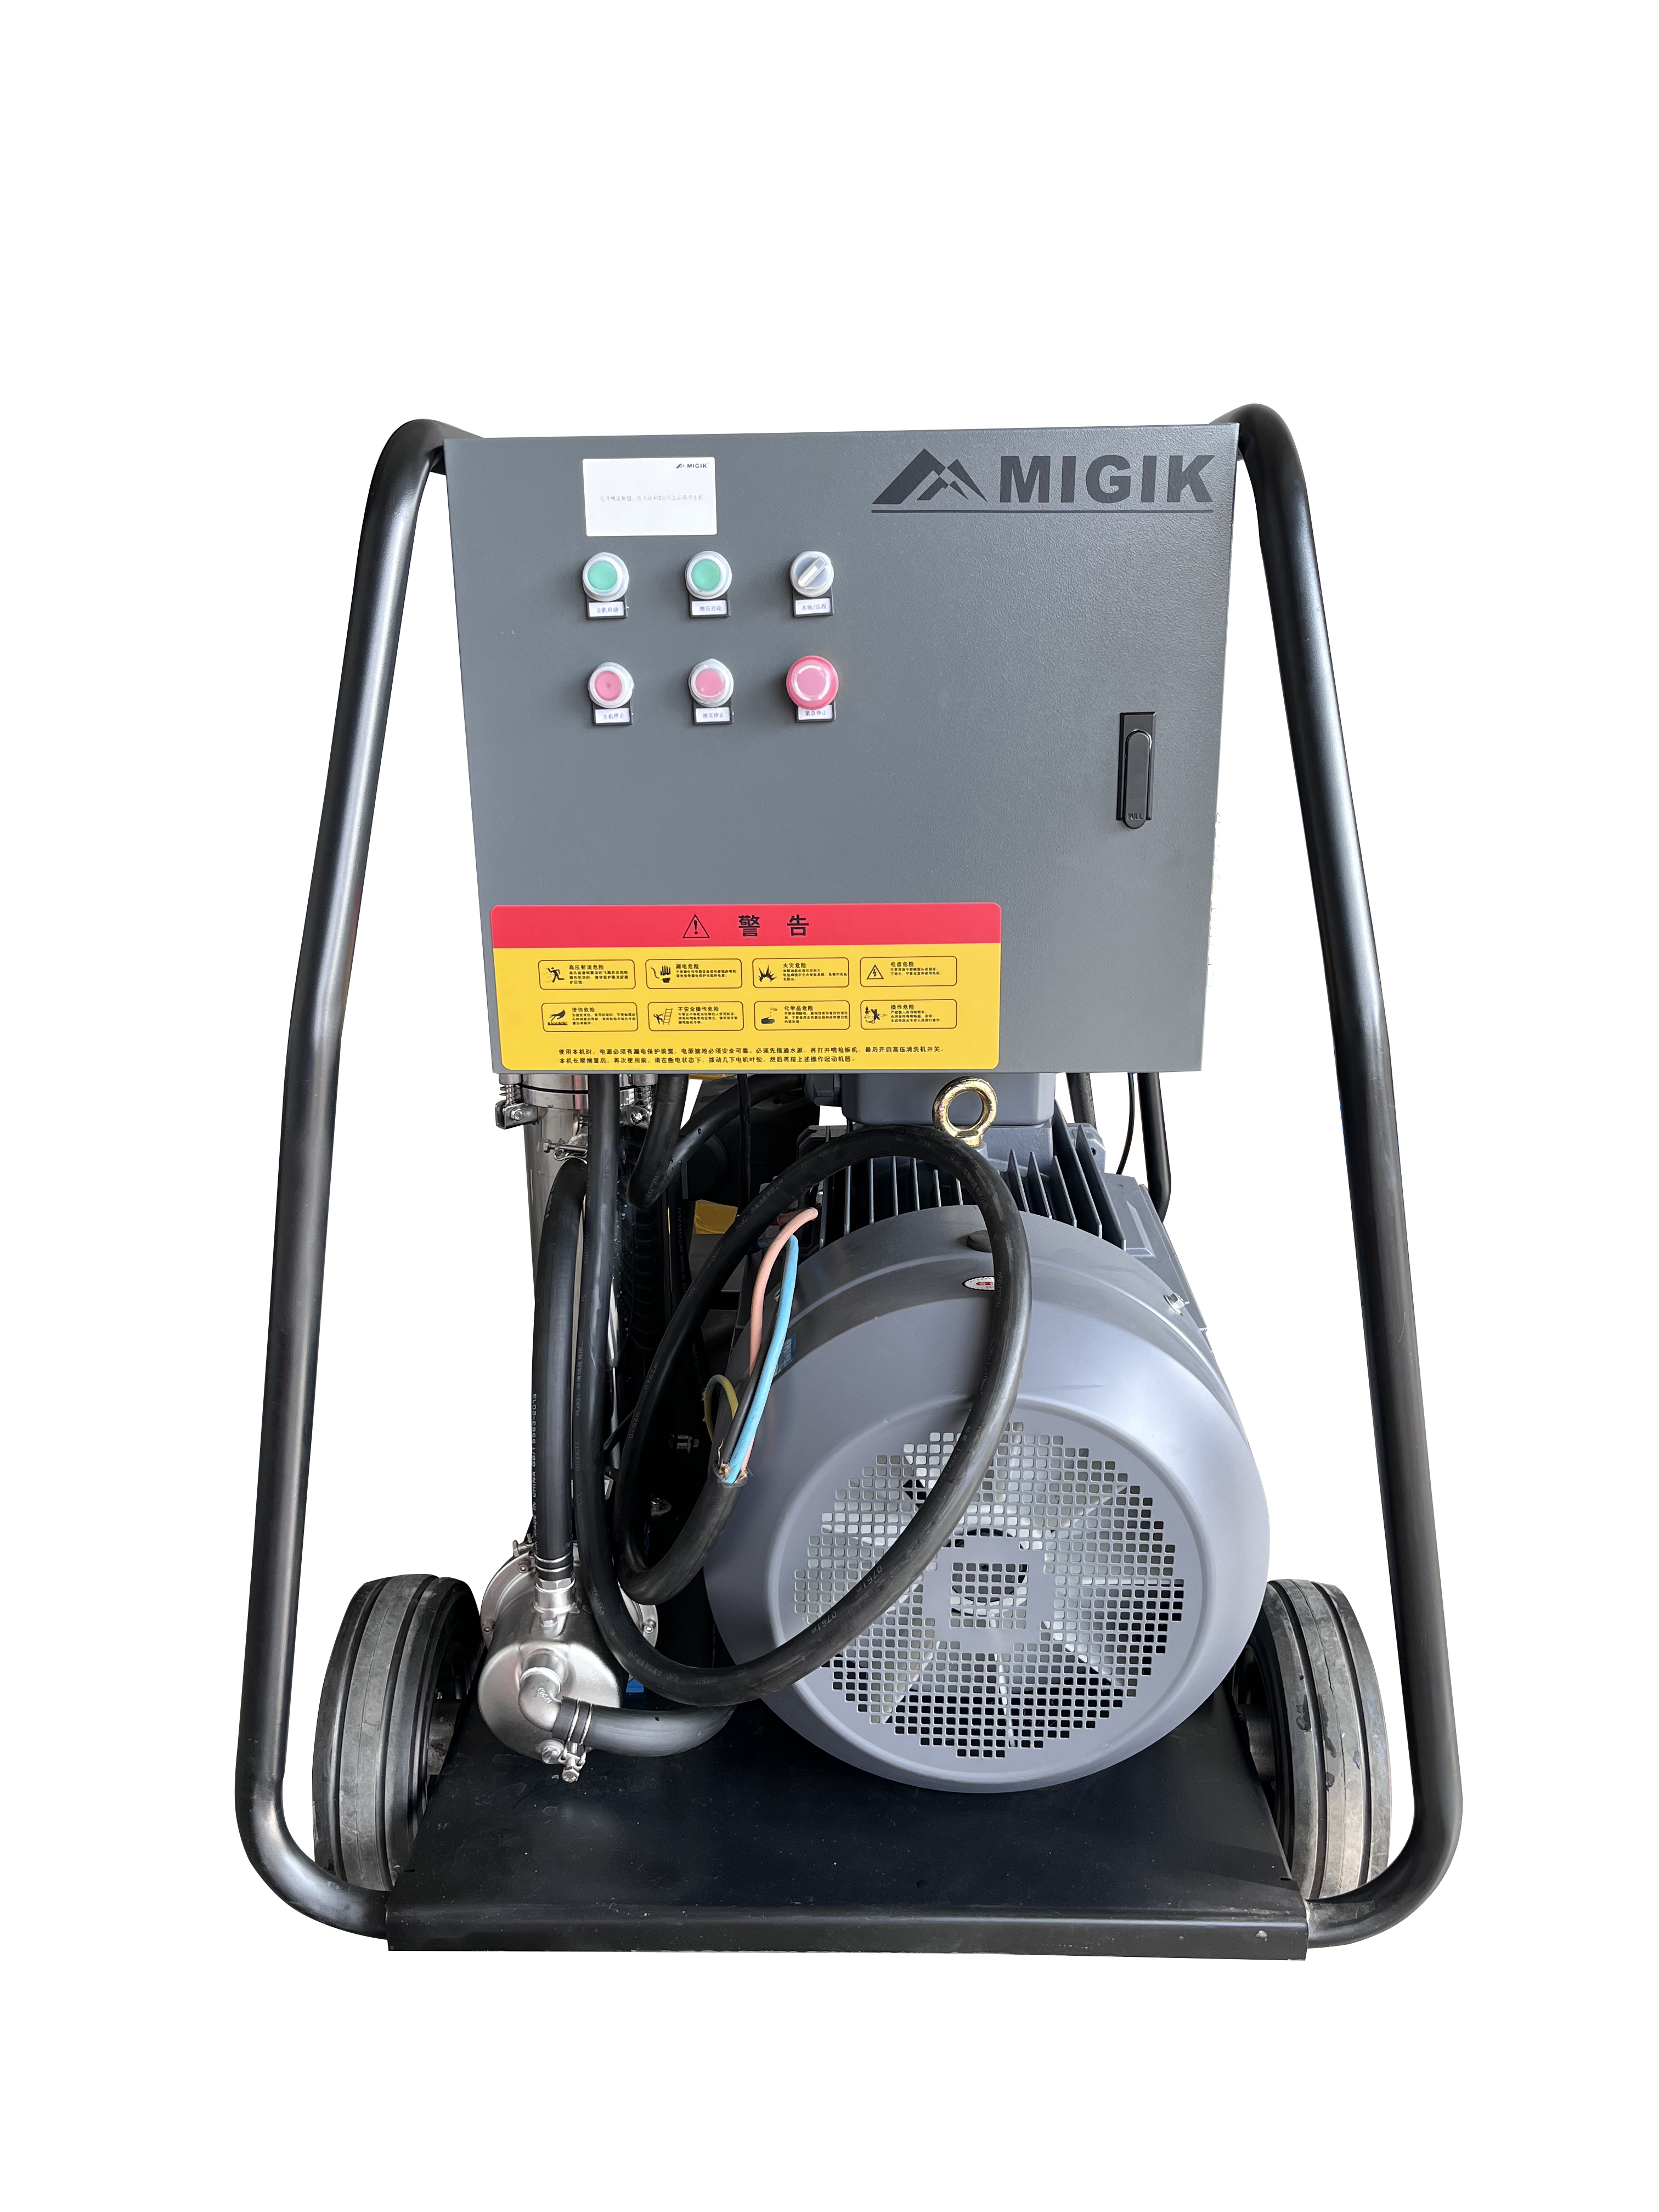 Maiji MIGIK MK20150E Ultra High Pressure Cleaning Machine for Ship Shell Rust Removal and Marine Biological Cleaning